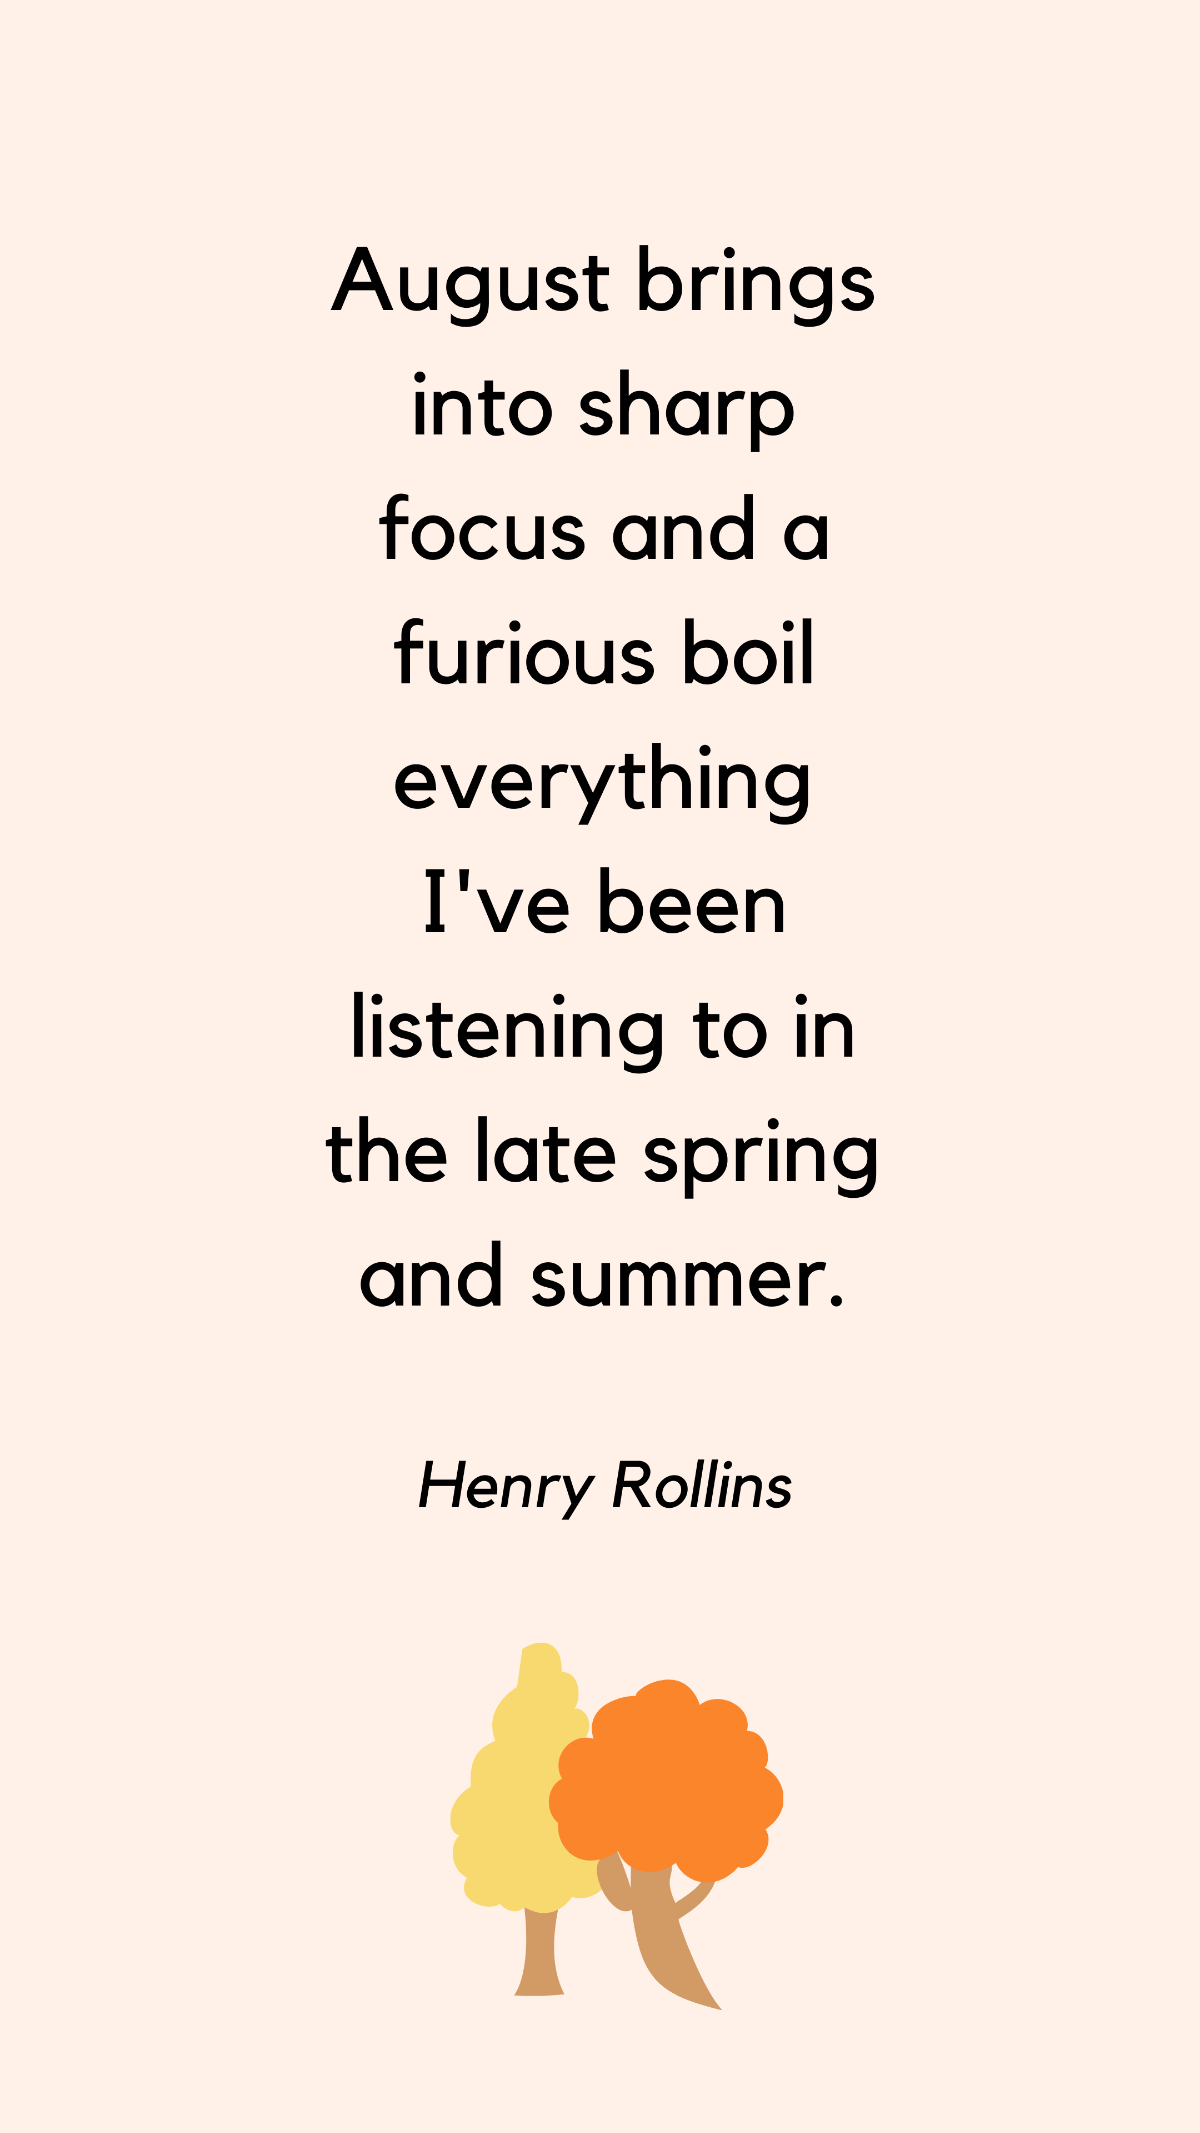 Free Henry Rollins - August brings into sharp focus and a furious boil everything I've been listening to in the late spring and summer. Template